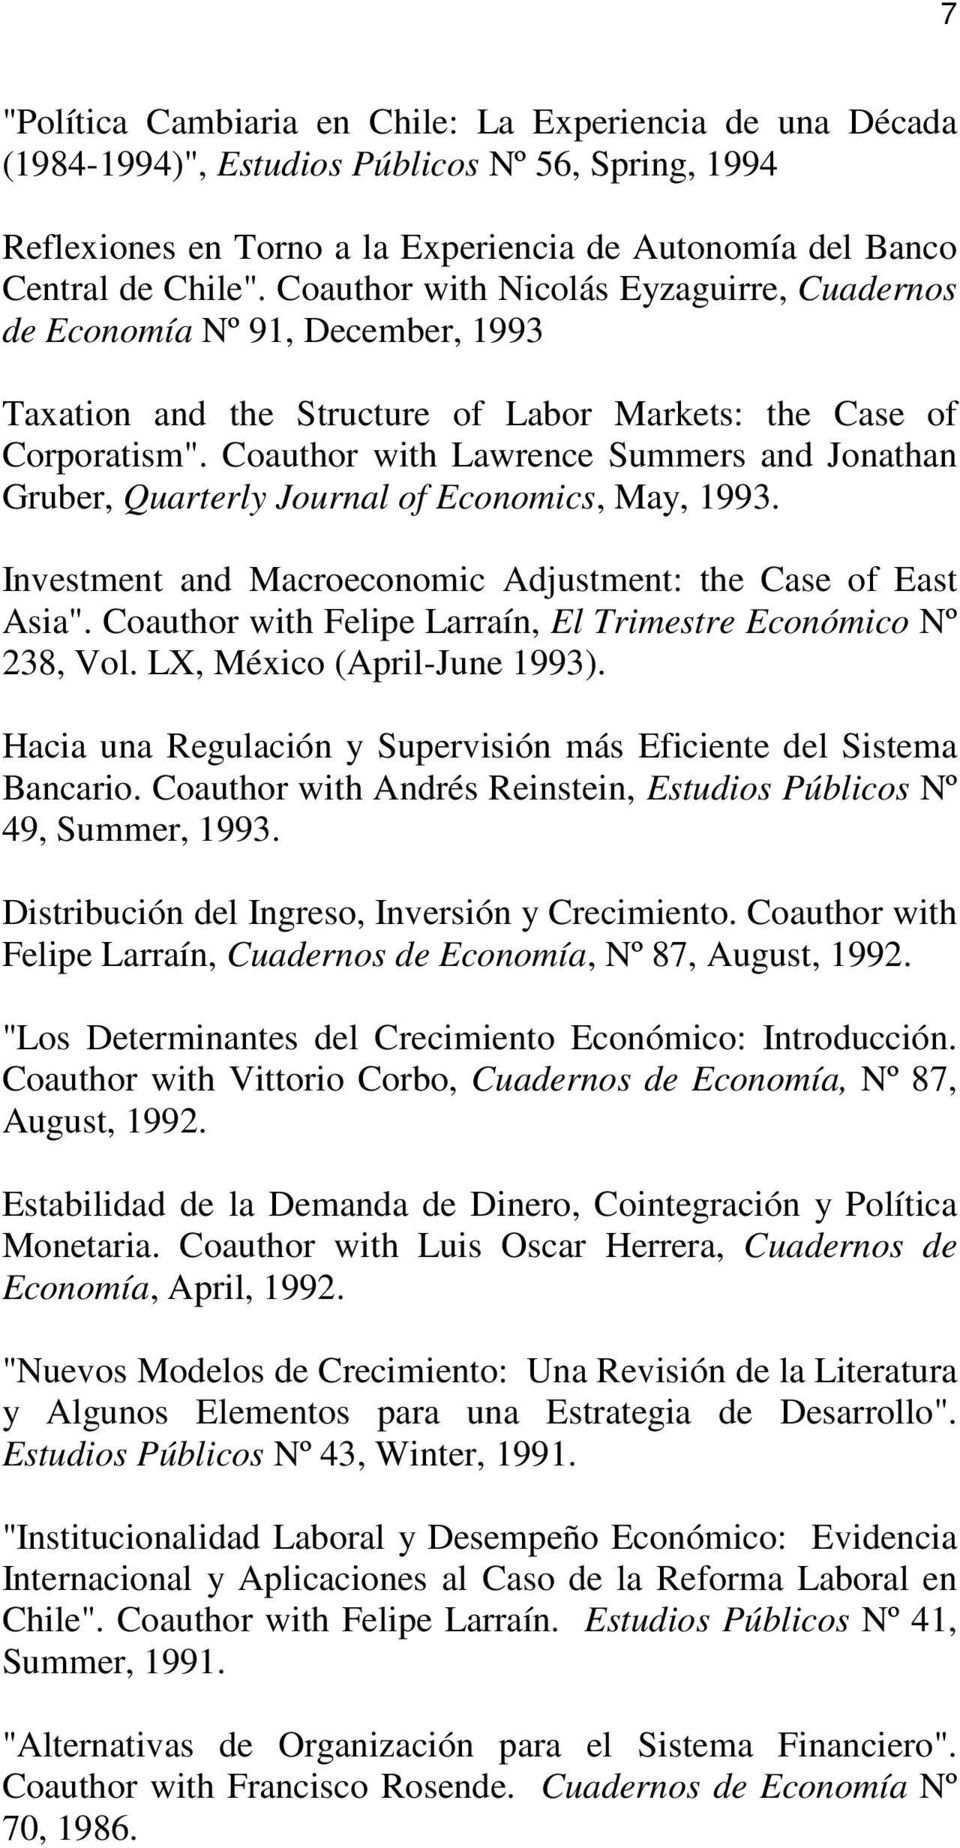 Coauthor with Lawrence Summers and Jonathan Gruber, Quarterly Journal of Economics, May, 1993. Investment and Macroeconomic Adjustment: the Case of East Asia".